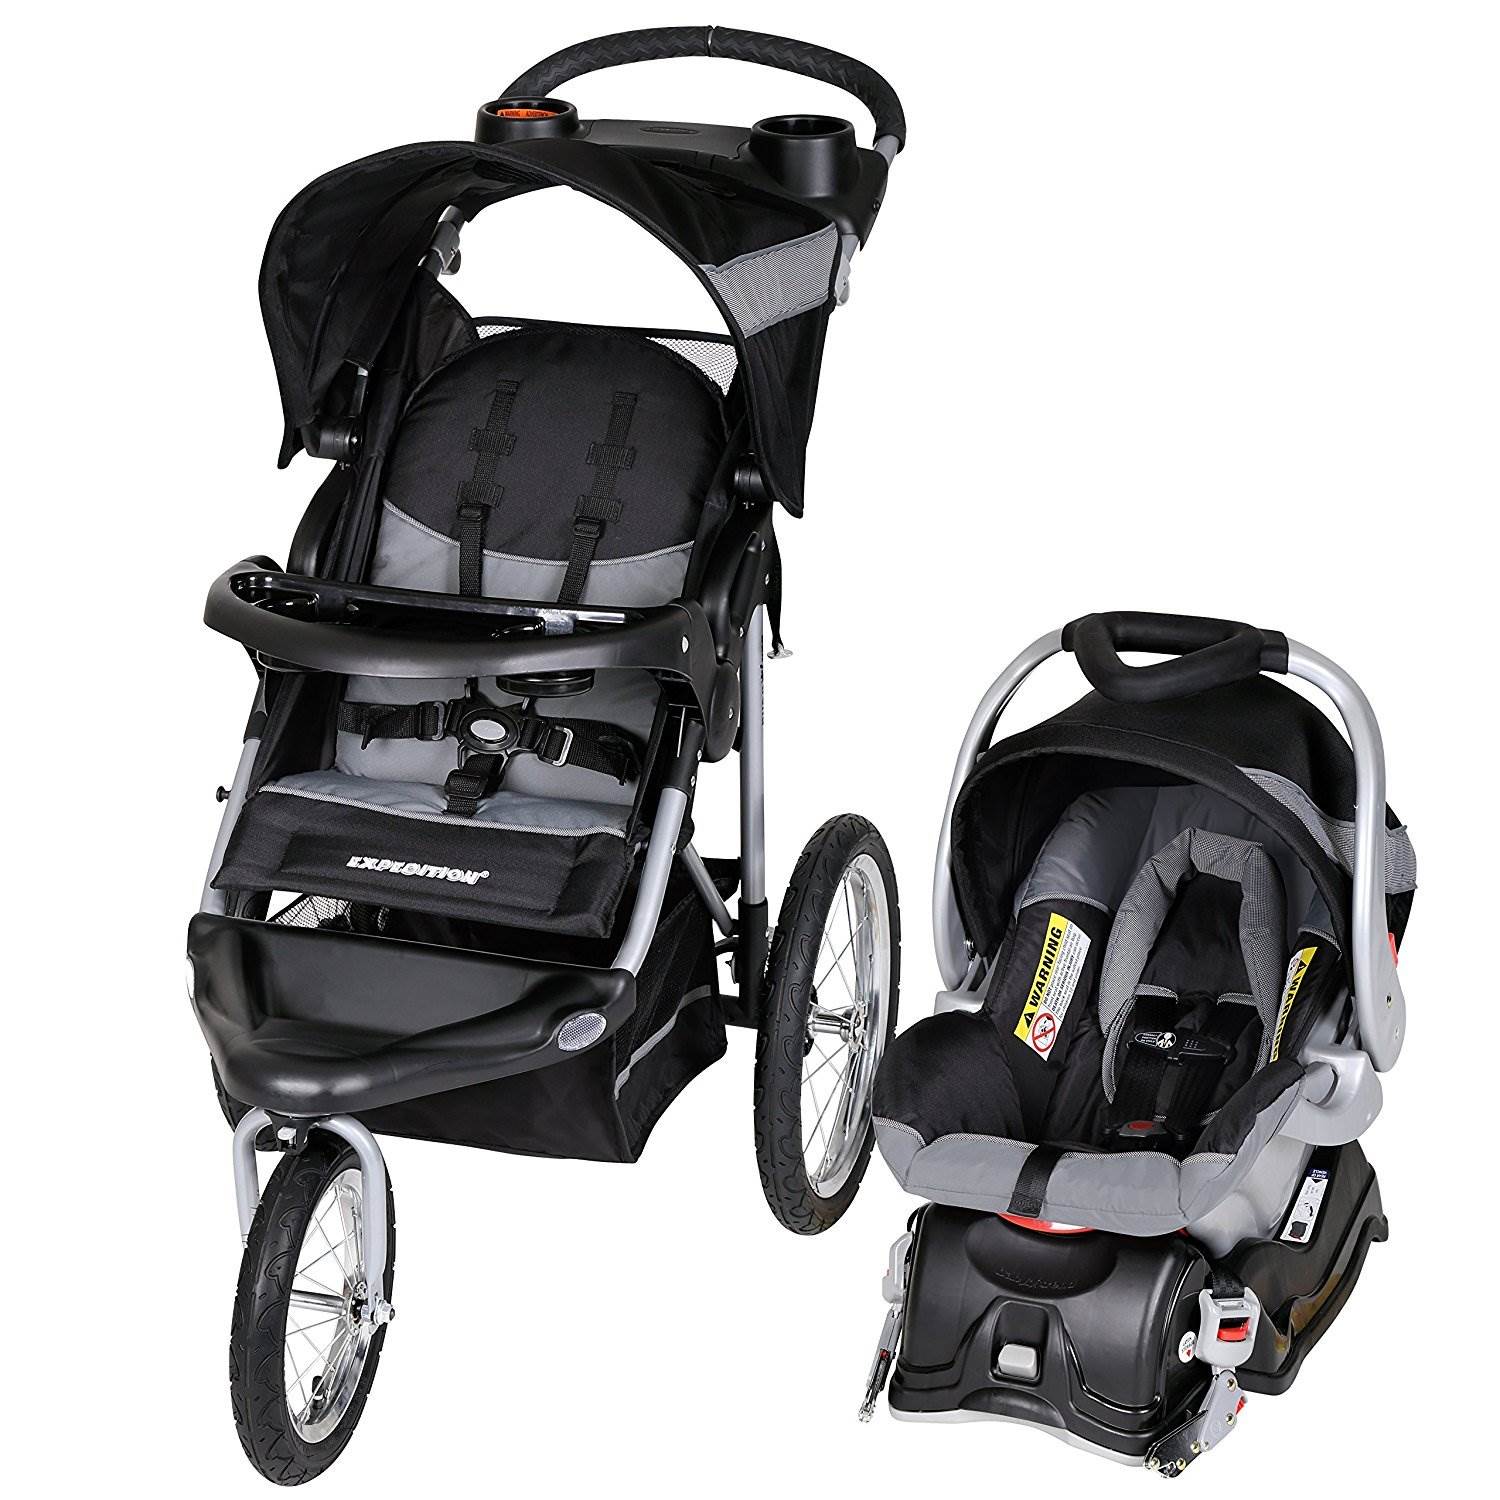 Baby Trend Expedition Travel System Stroller, Millennium White - image 1 of 7